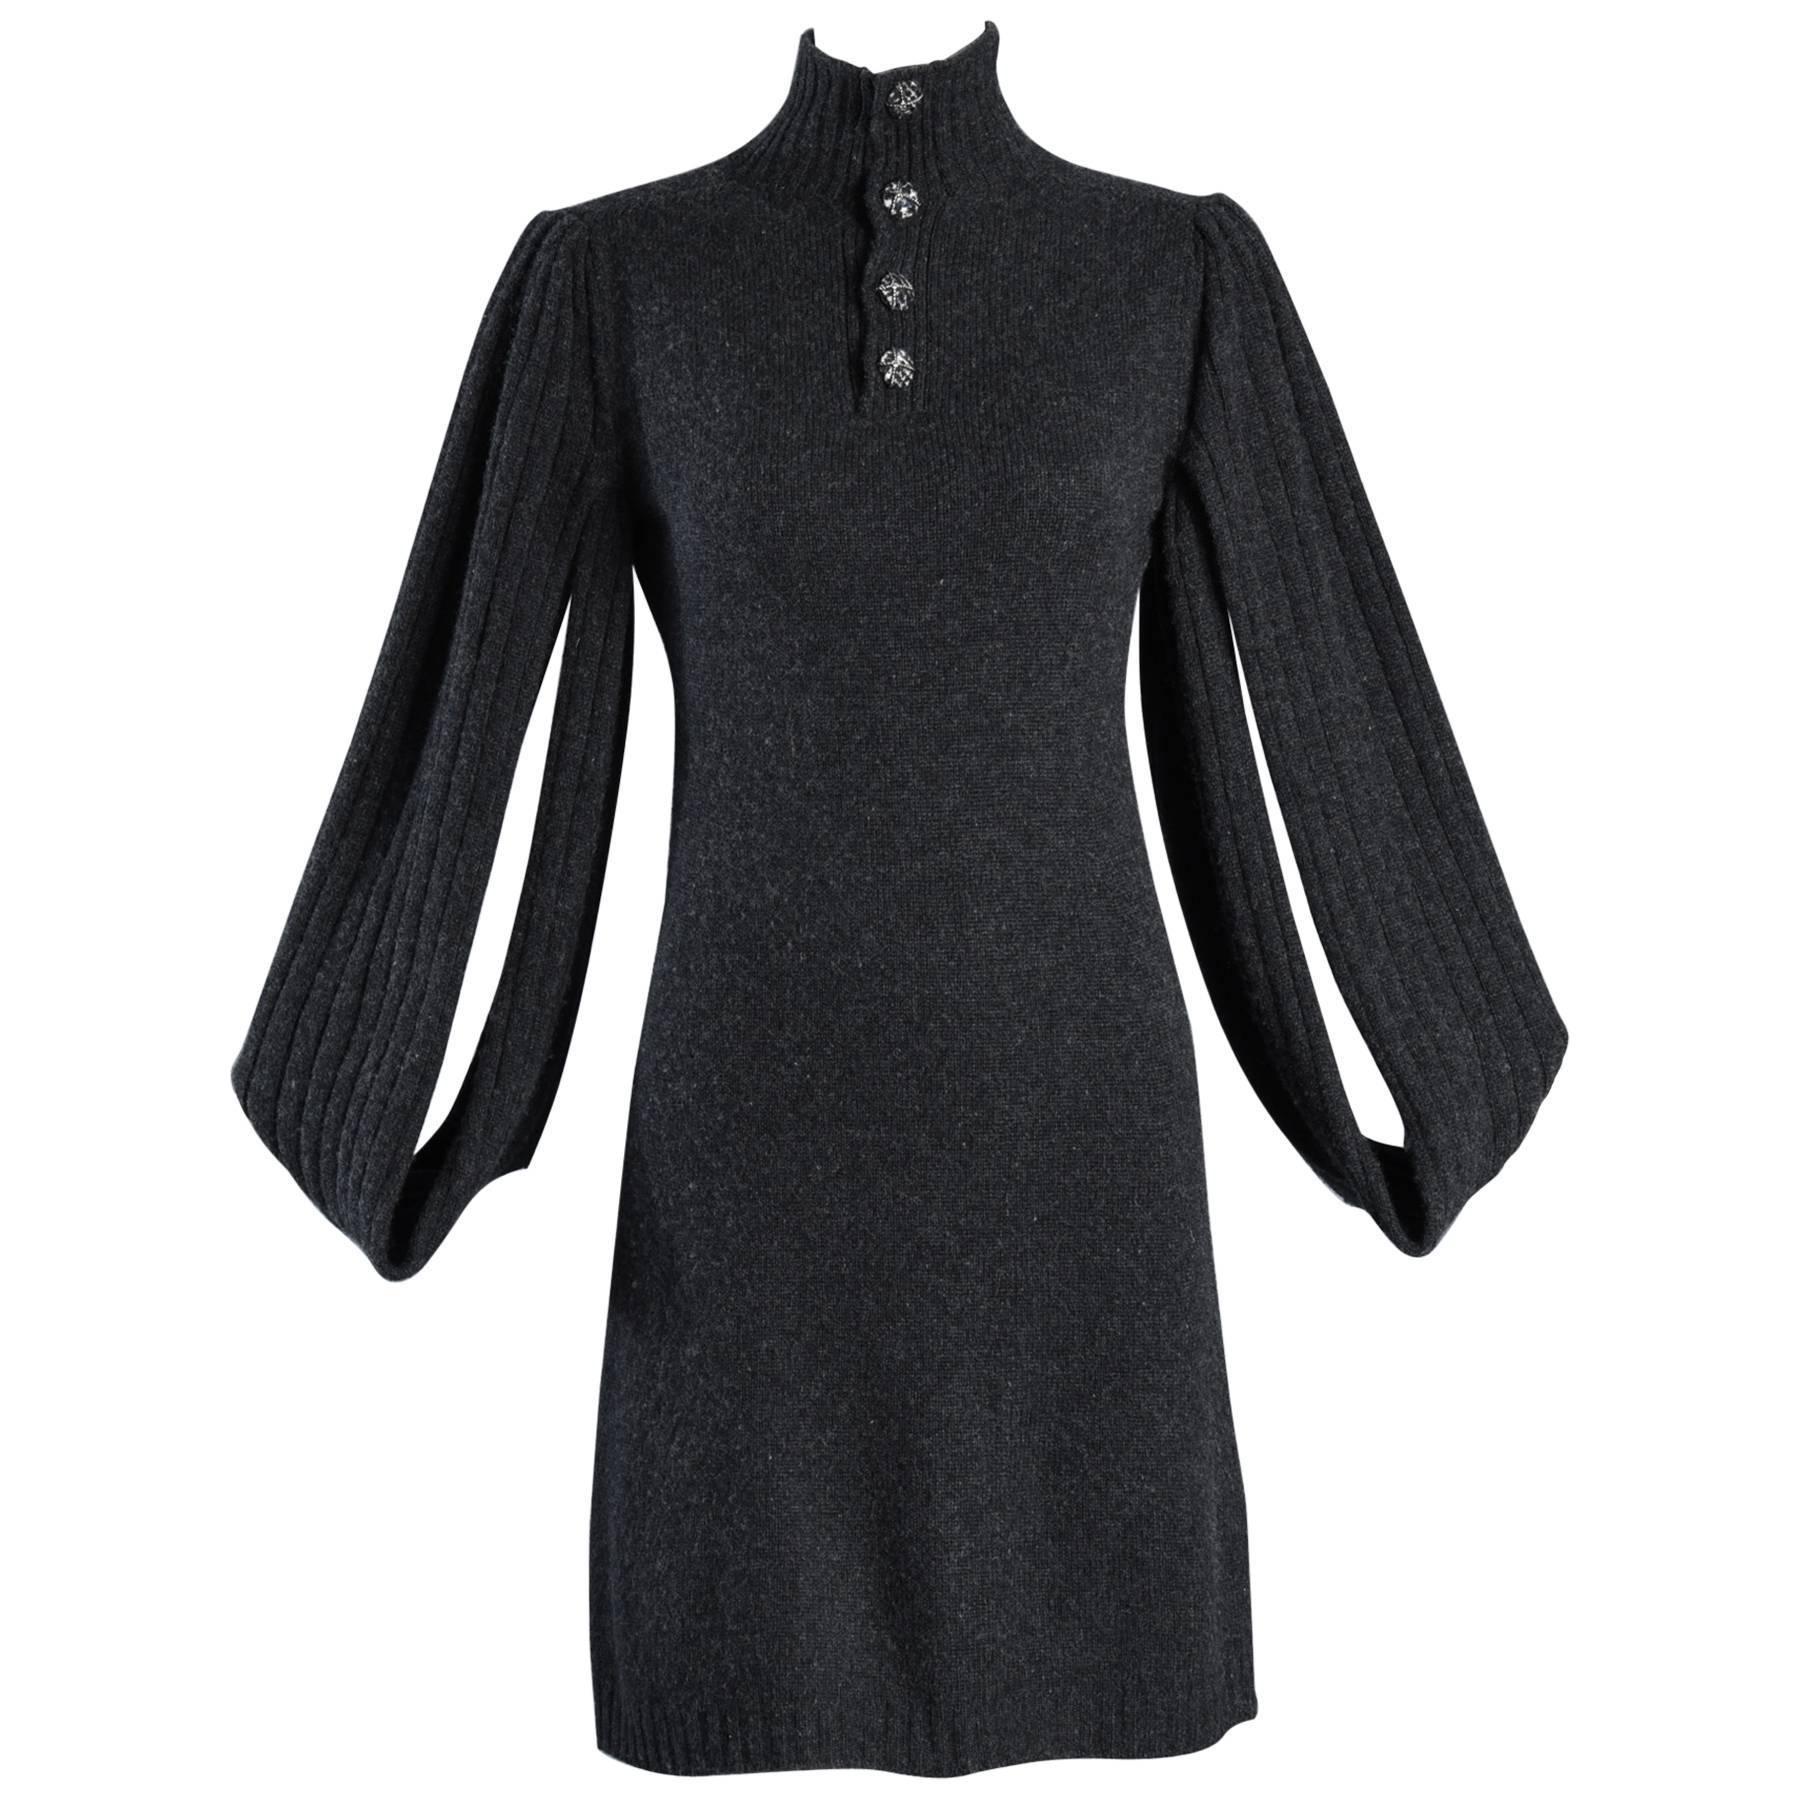 Killer Chanel Cashmere Sweater Dress with Open Sleeves